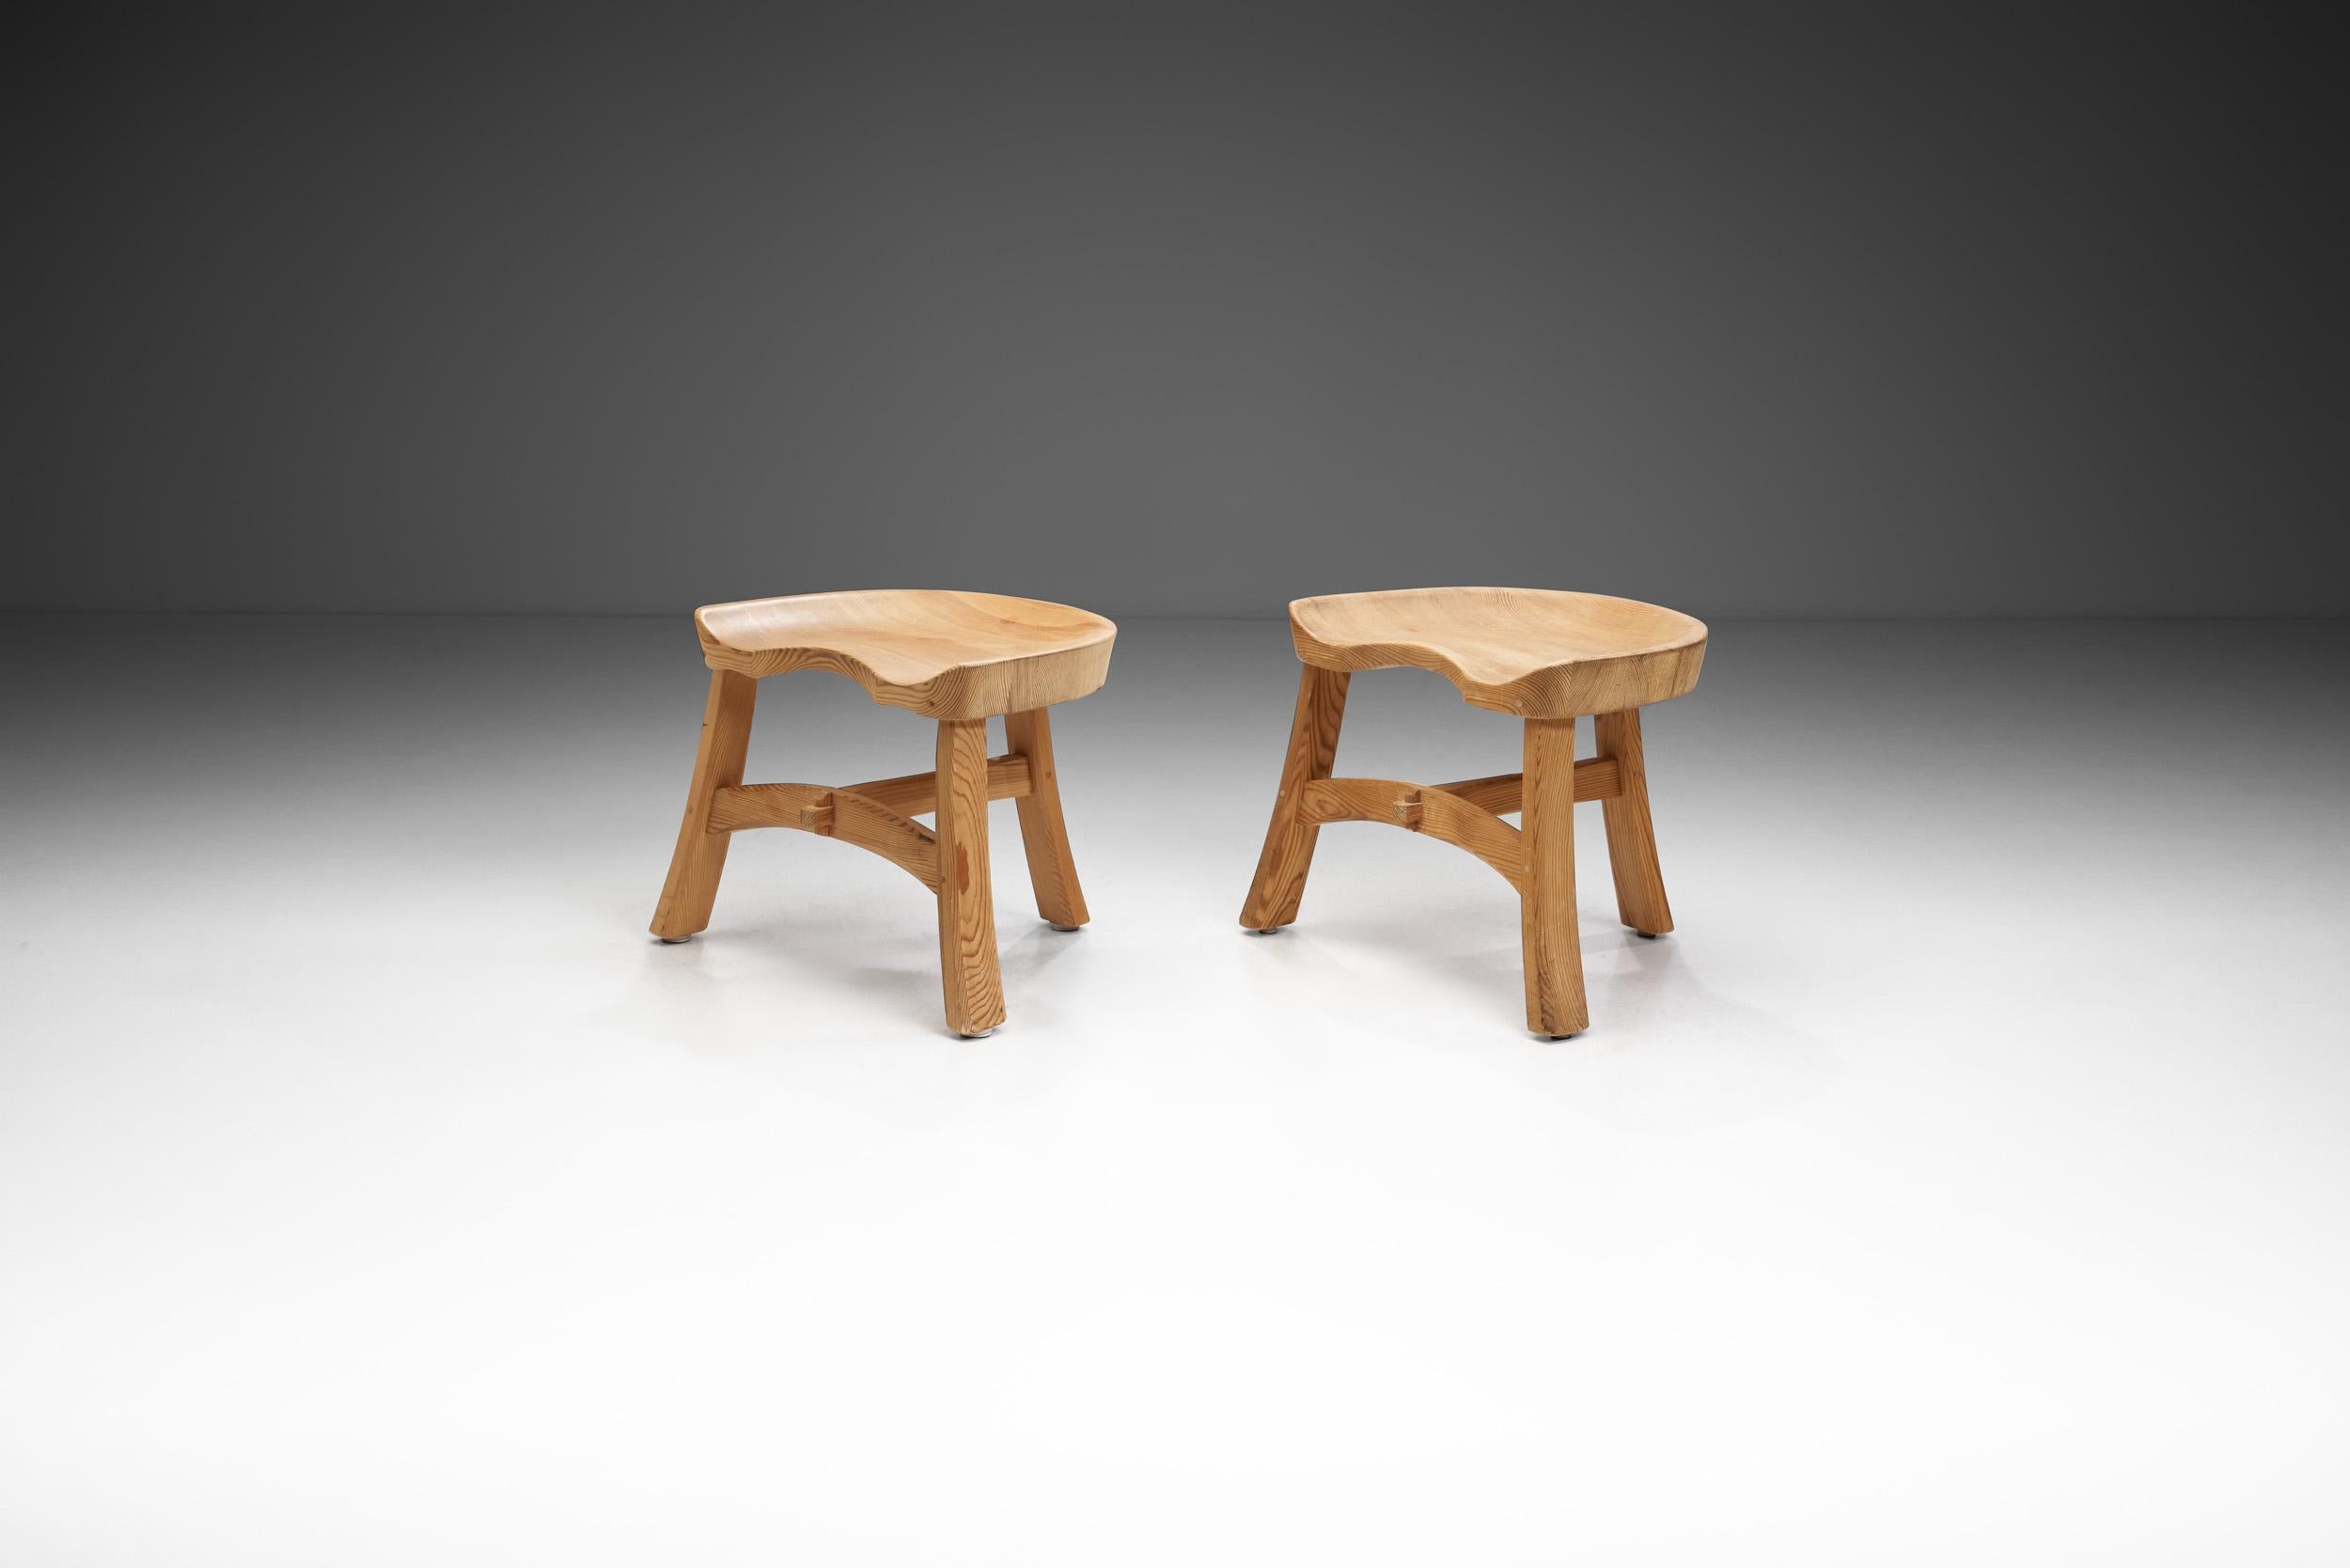 What makes wood so appealing besides its natural beauty is the ease in which it can be cut and the array of beautiful shapes that can be sculpted from it. These mid-century stools, reminiscent of ones created by Krogenæs Møbler in Norway, exude